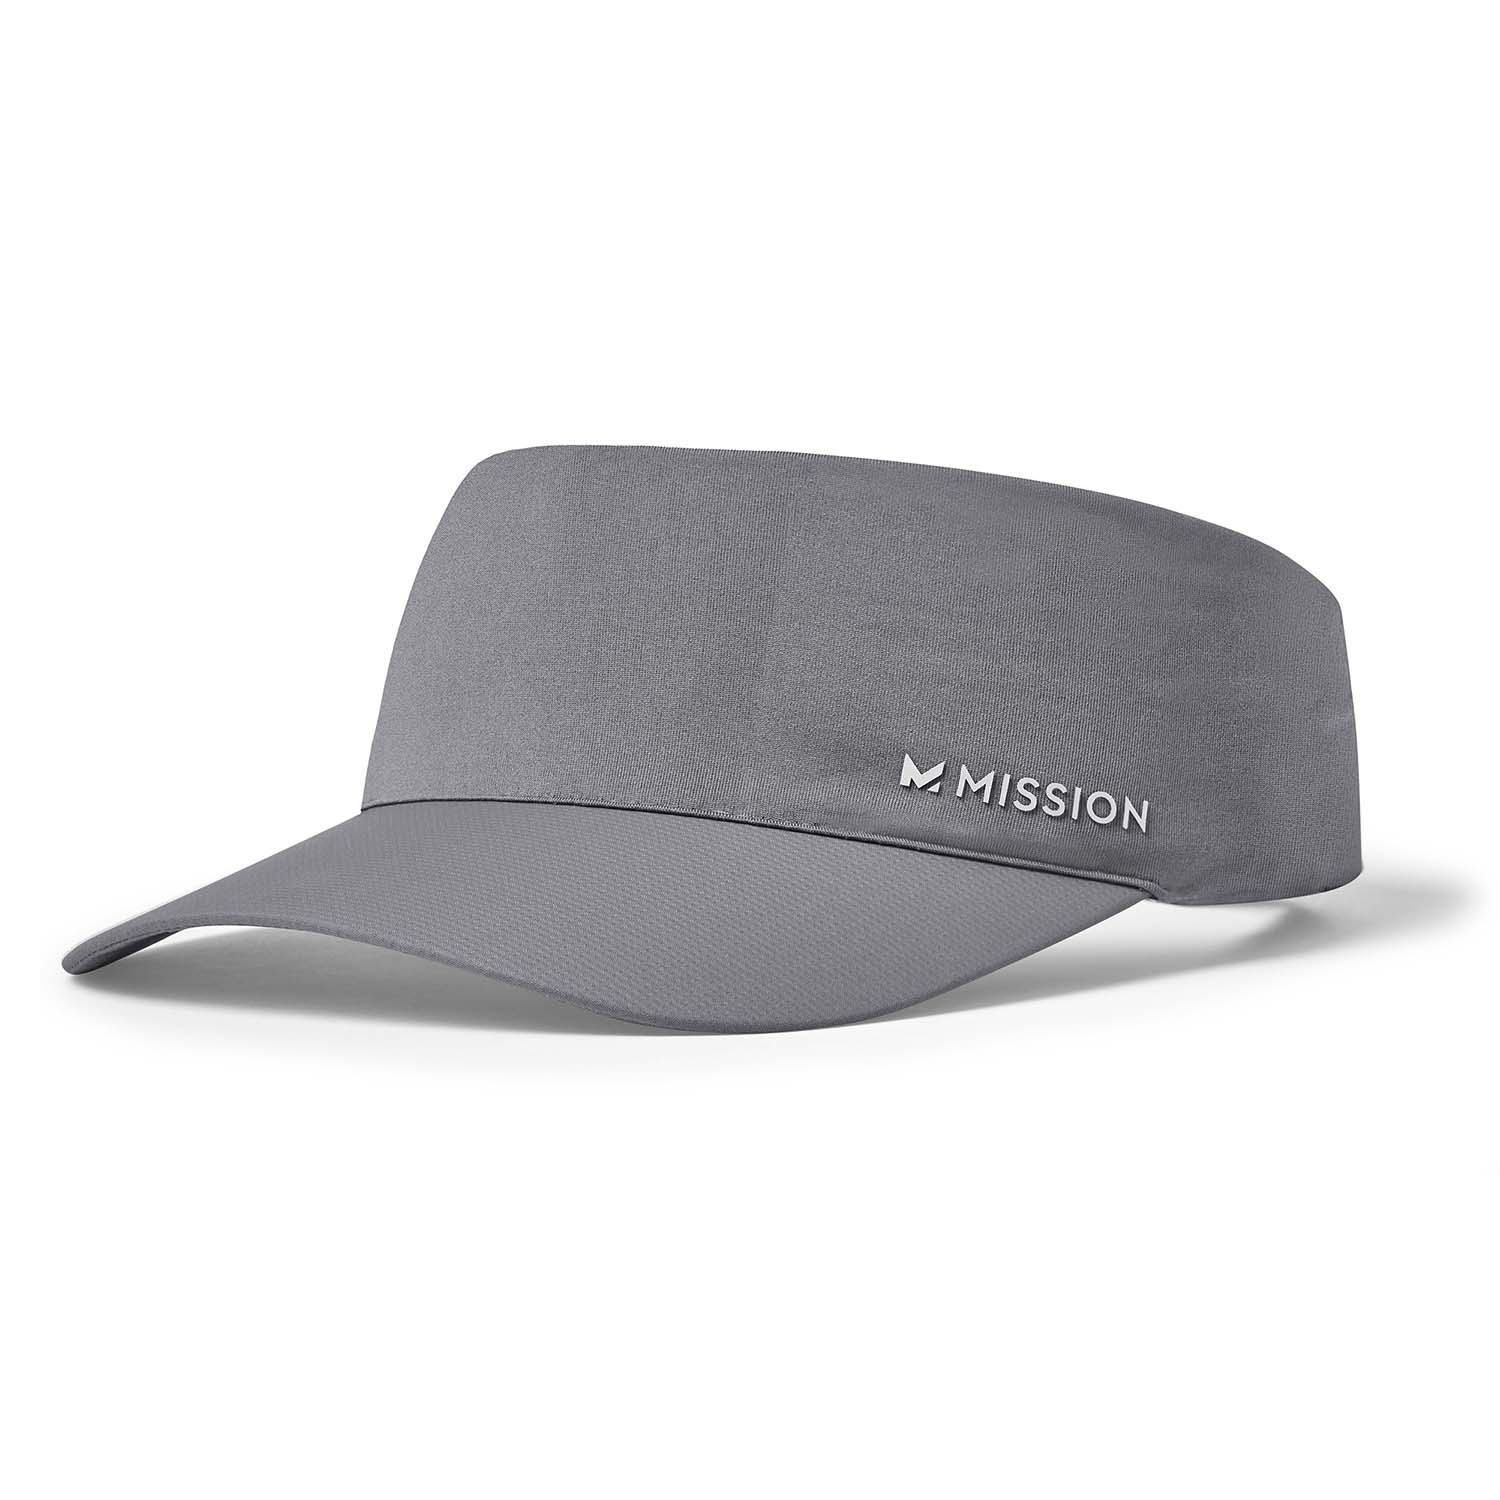 Cooling Visor Caps MISSION One Size Charcoal 